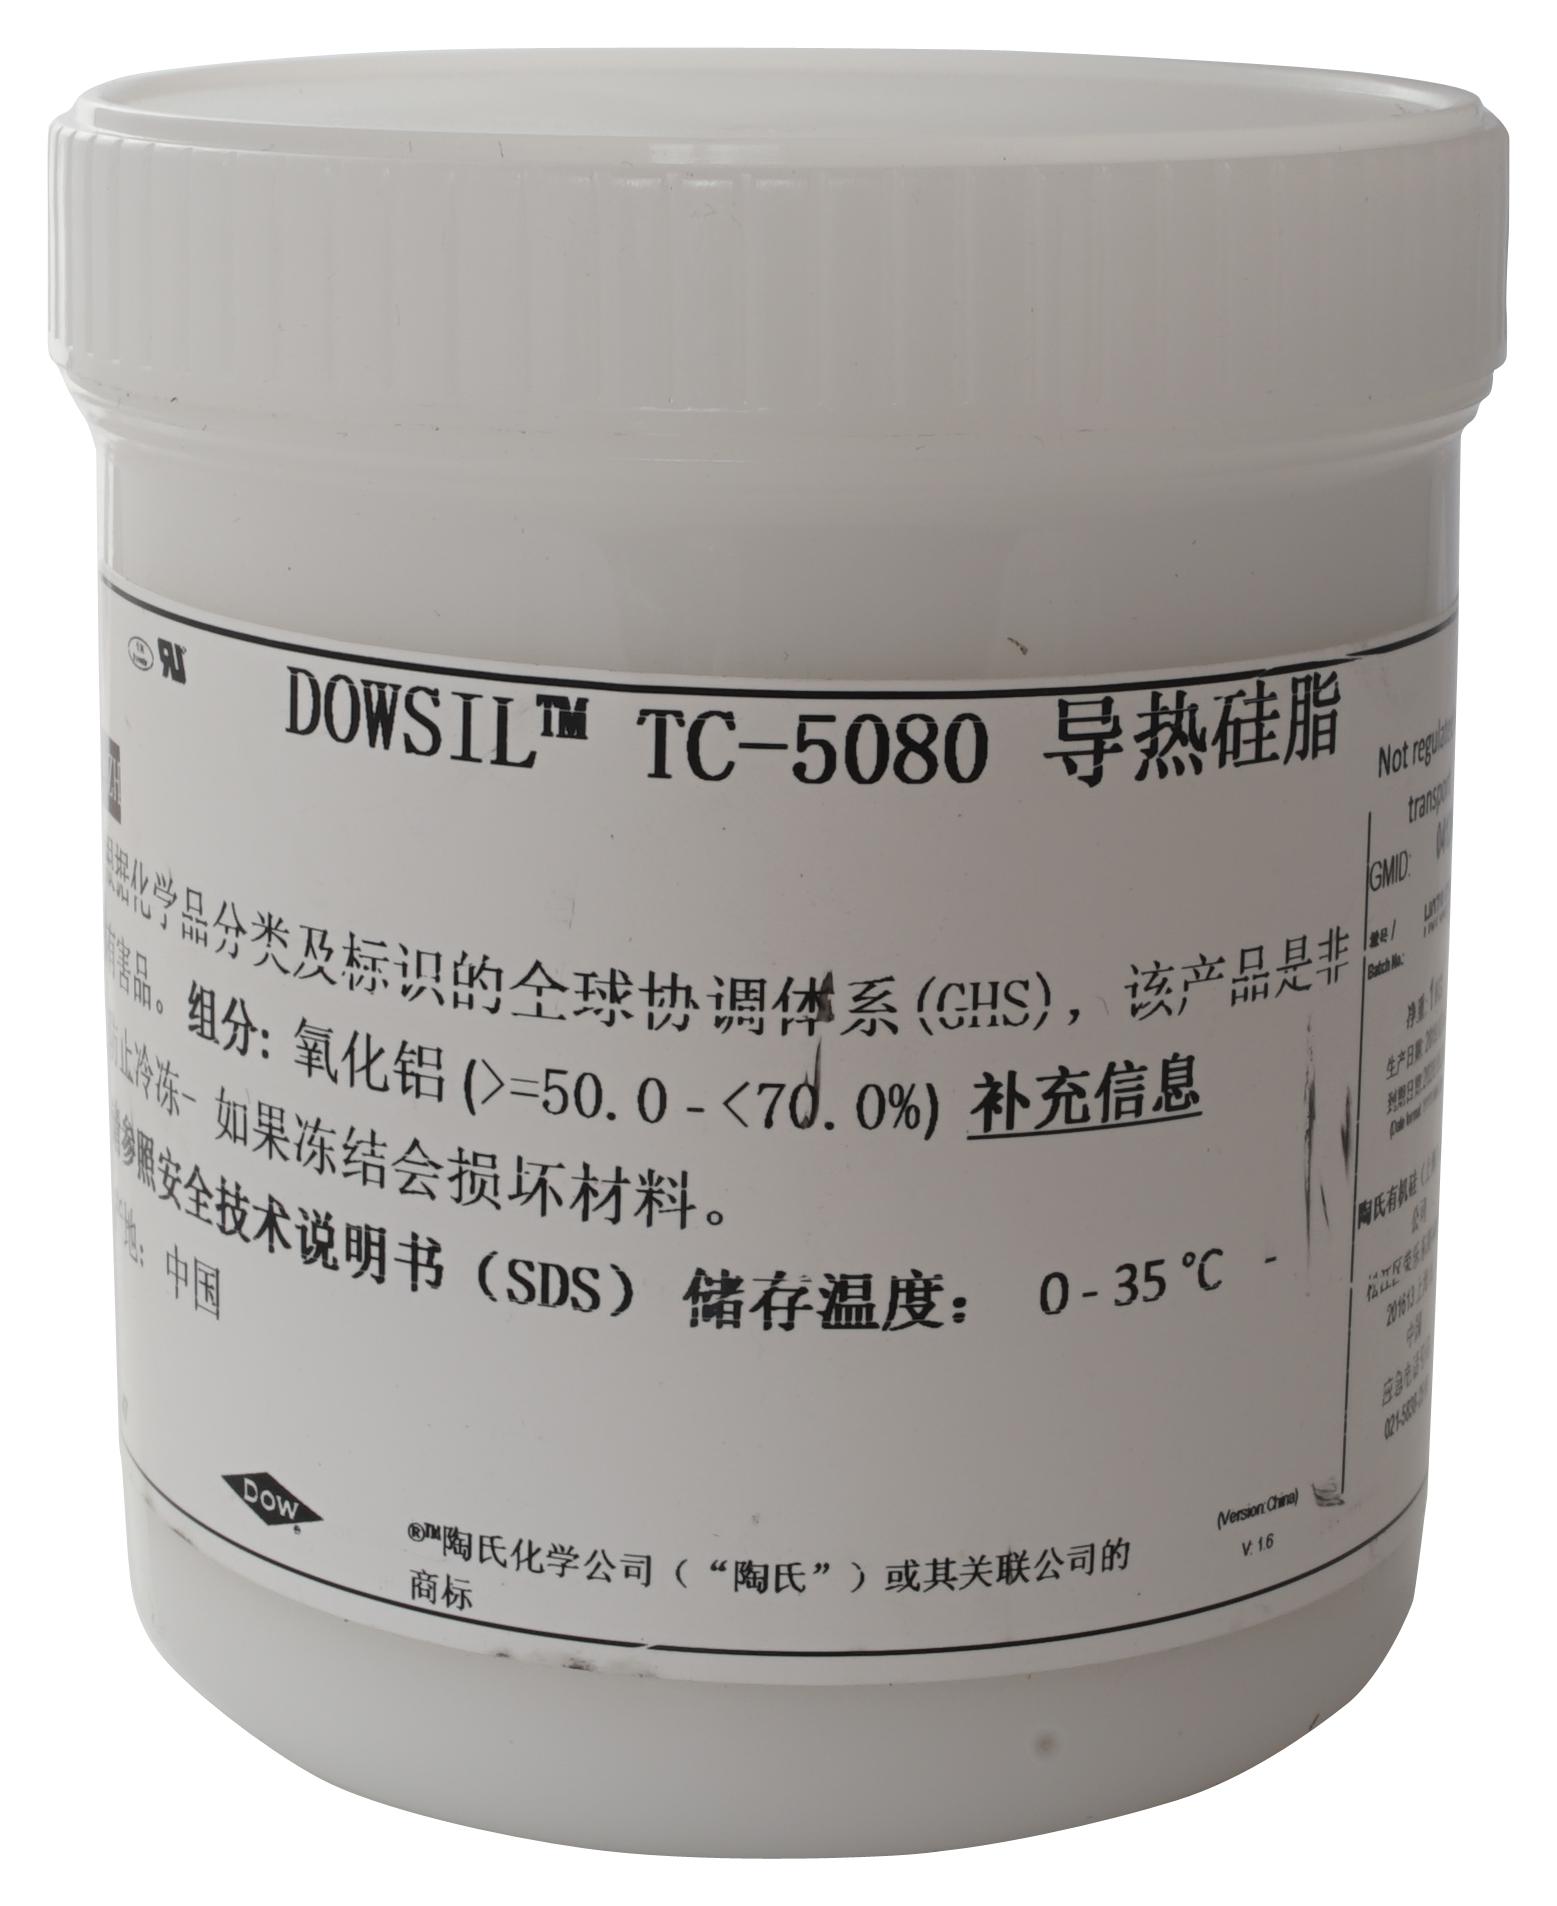 TC-5080, 1KG THERMALLY CONDUCTIVE COMPOUND, CAN, 1KG DOW